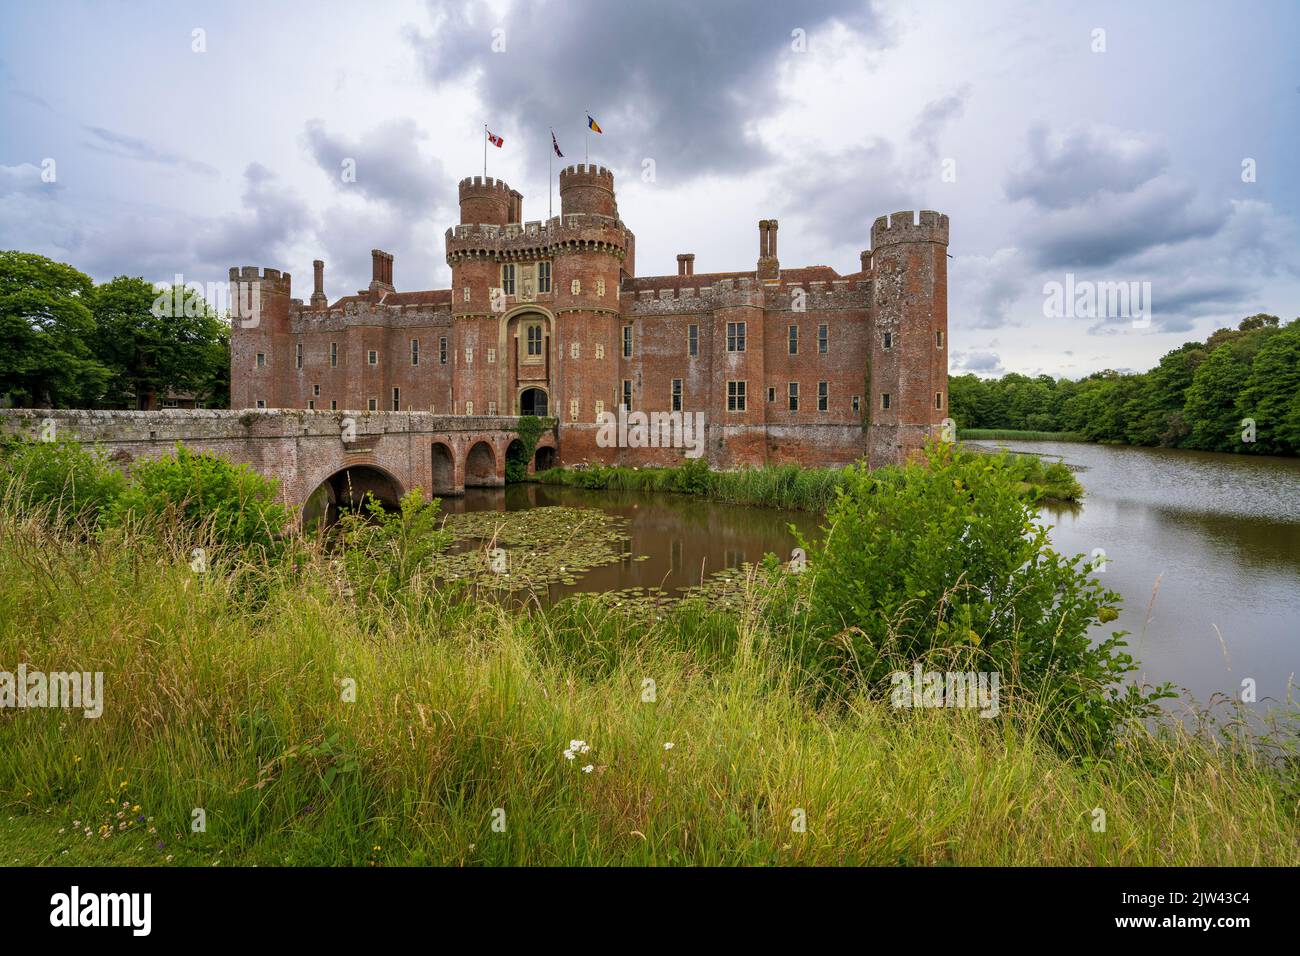 Castello di Herstmonceux, Herstmonceux, East Sussex, Inghilterra, Regno Unito Foto Stock